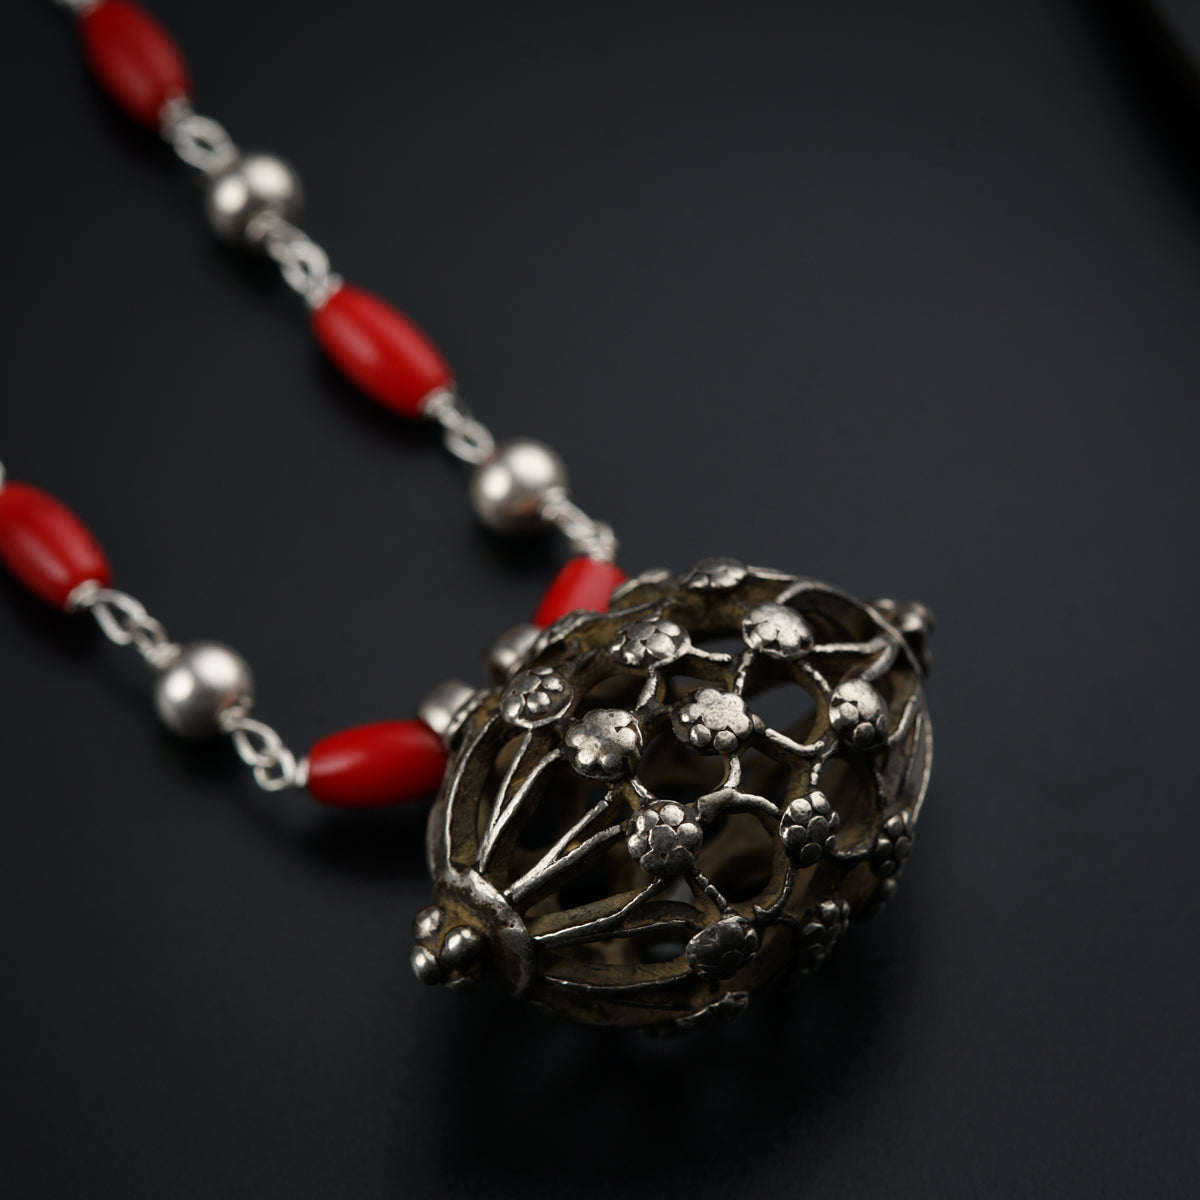 a necklace with a red bead and a silver ball